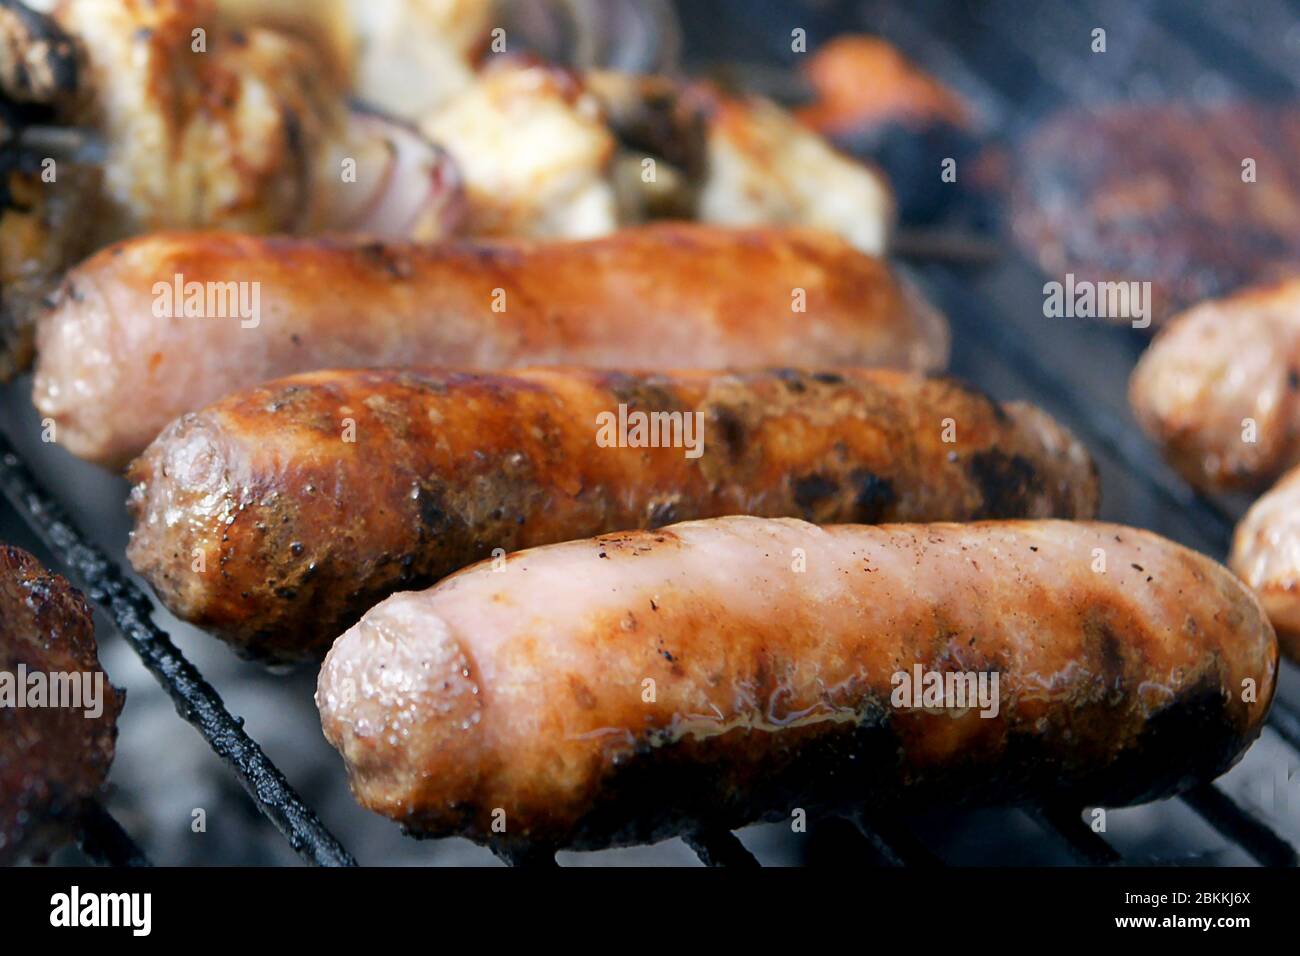 outdoor cooking, Australia Day, barbeque Stock Photo